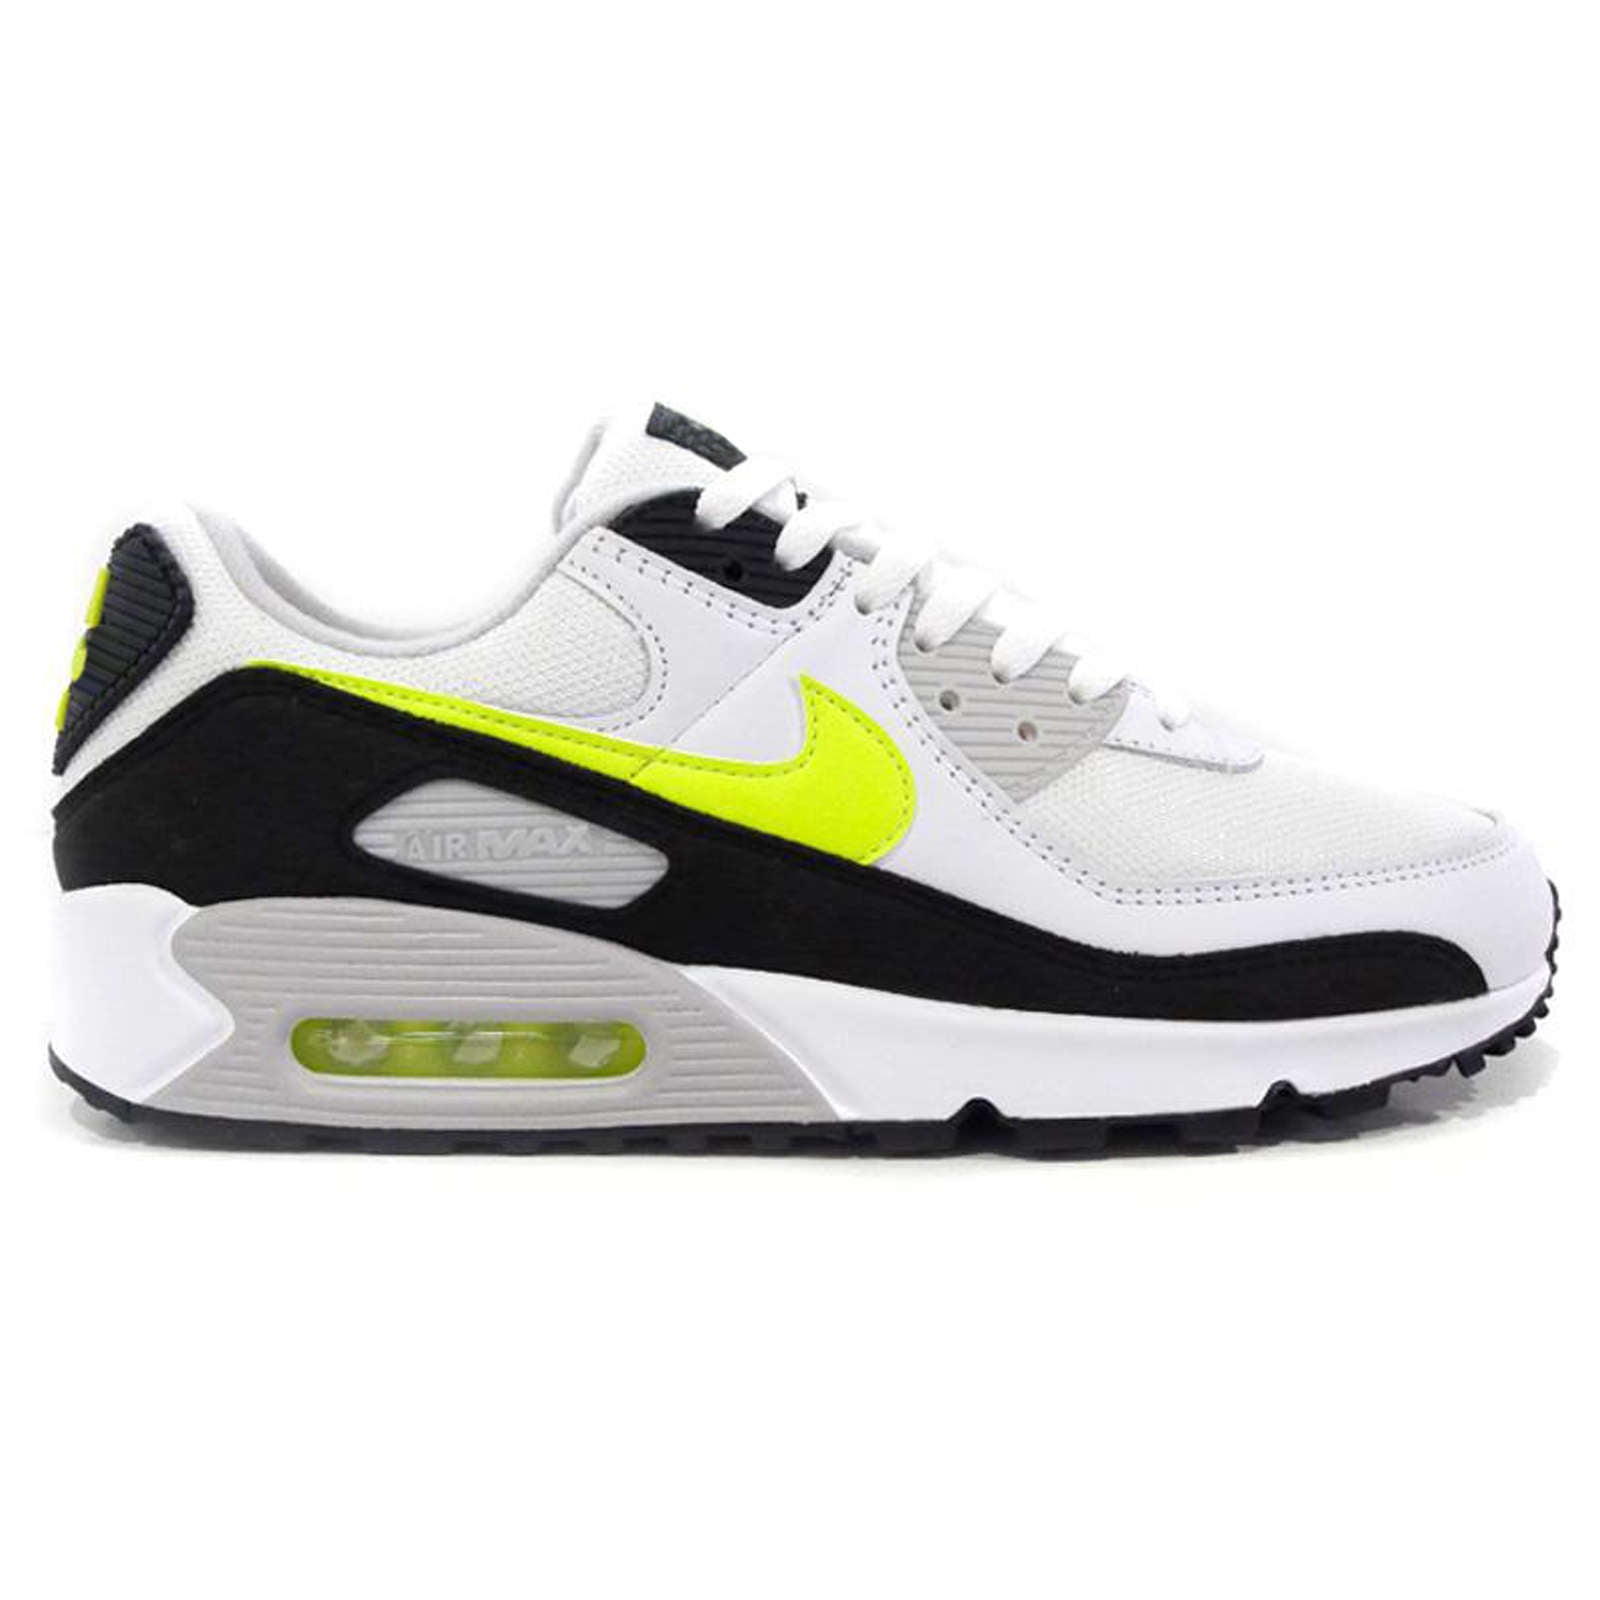 Nike Air Max 90 Leather Textile Unisex Low-Top Trainers#color_white hot lime black